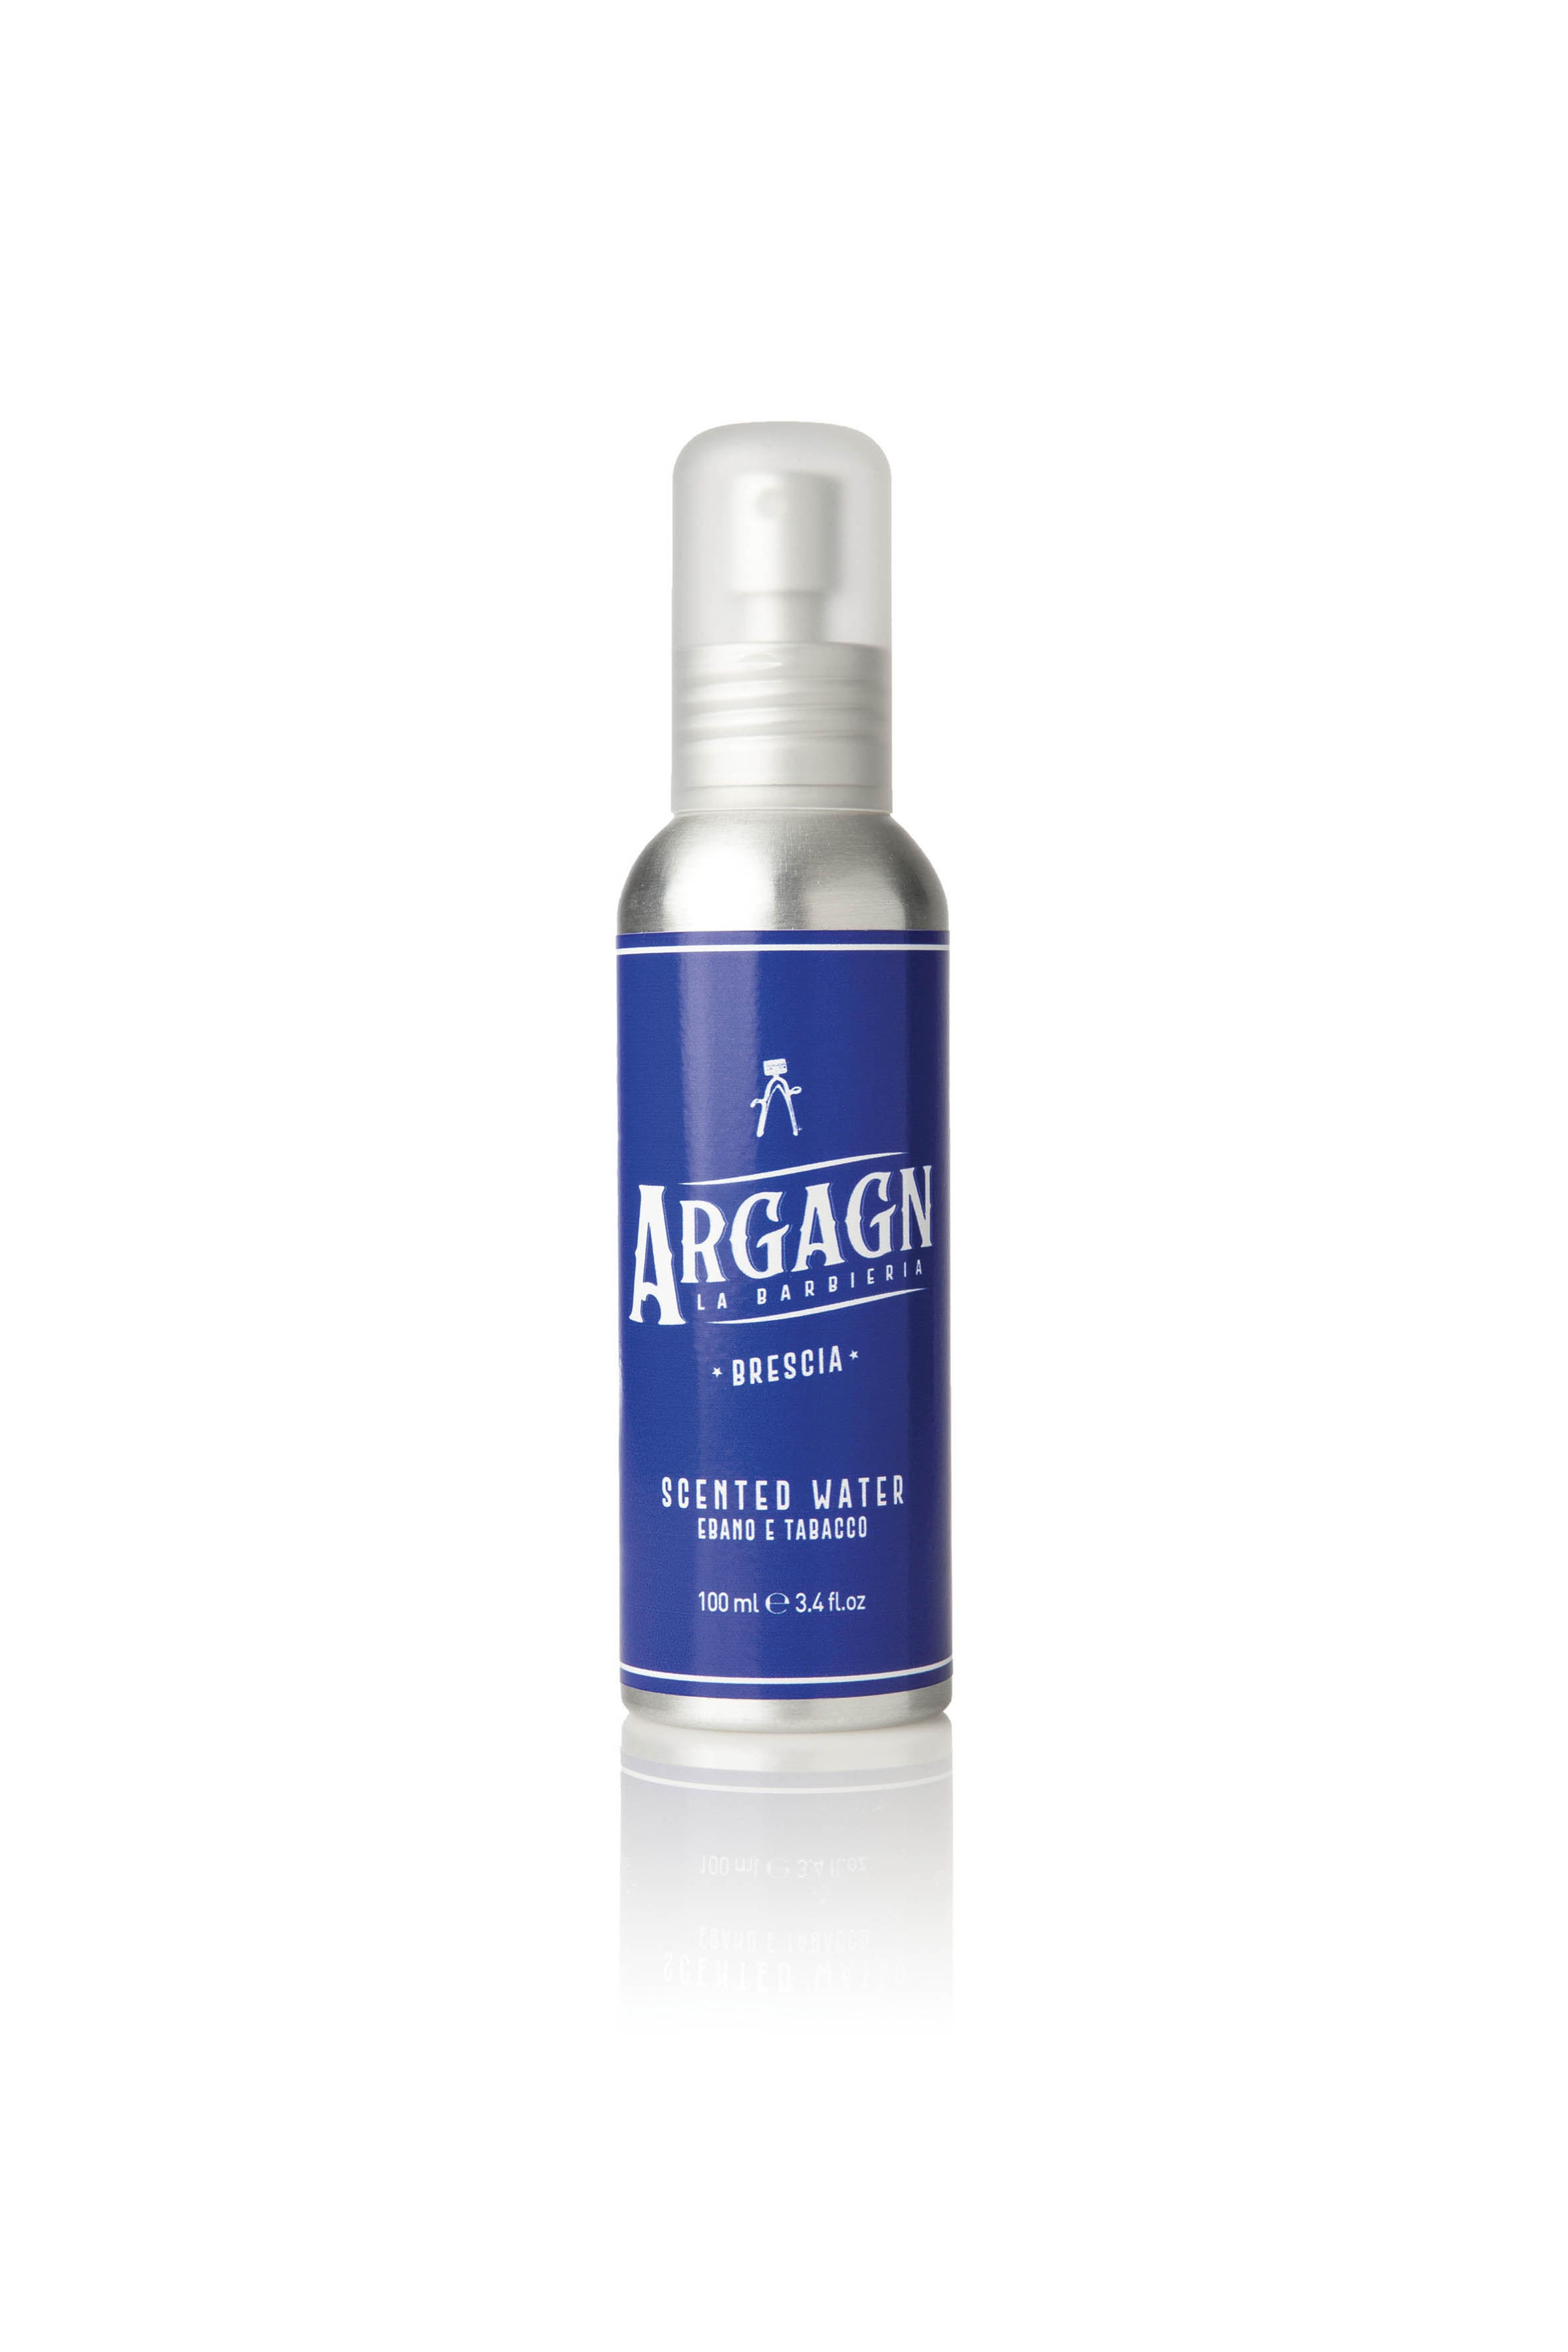 Argagn Scented Water 1